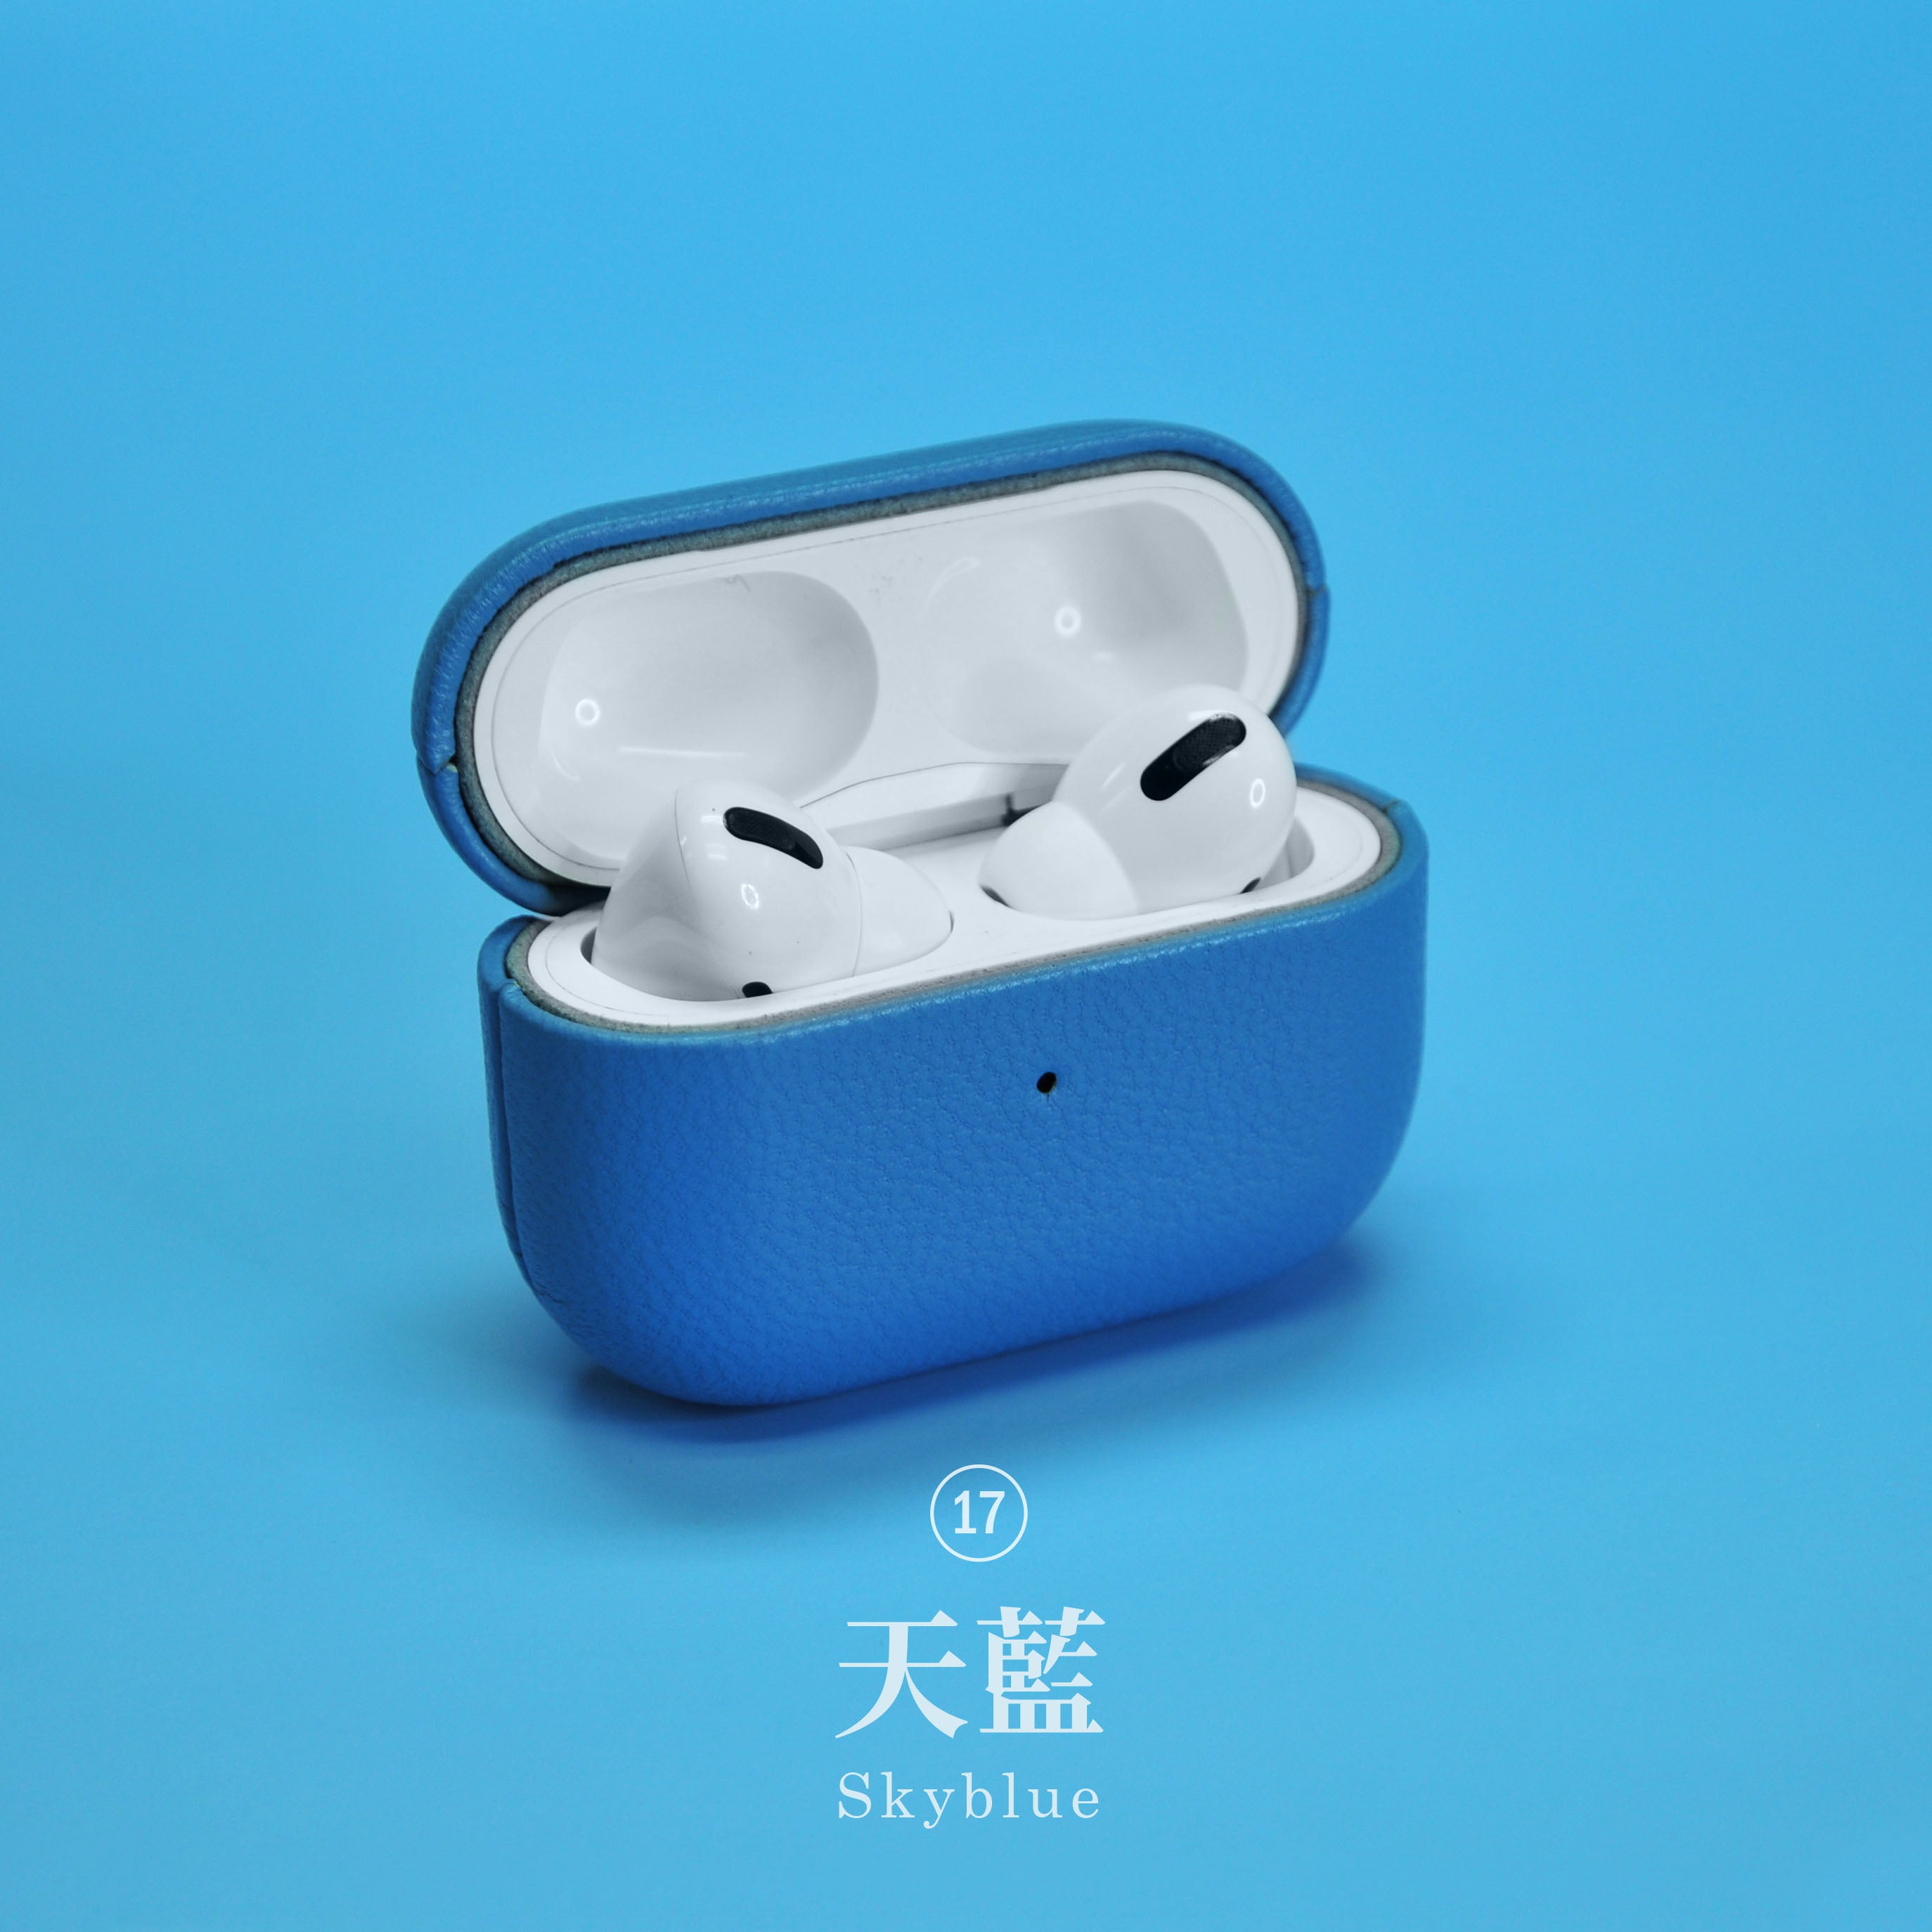 Designer Blue Leather AirPods Pro Case - Fast Delivery - iPhonecaseUK